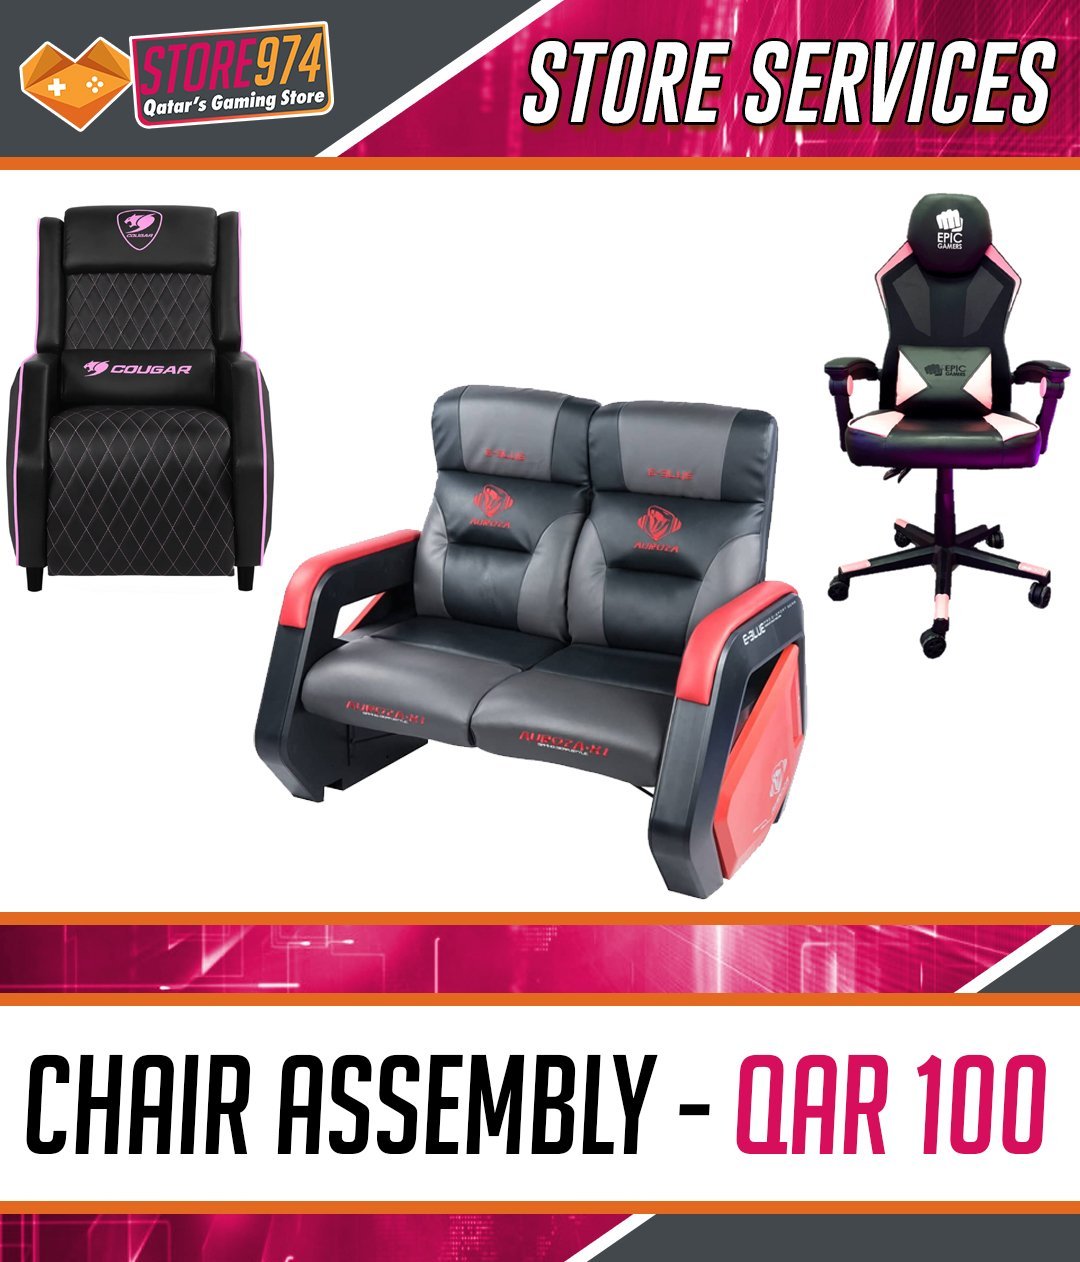 Chair Assembly Service - Store 974 | ستور ٩٧٤